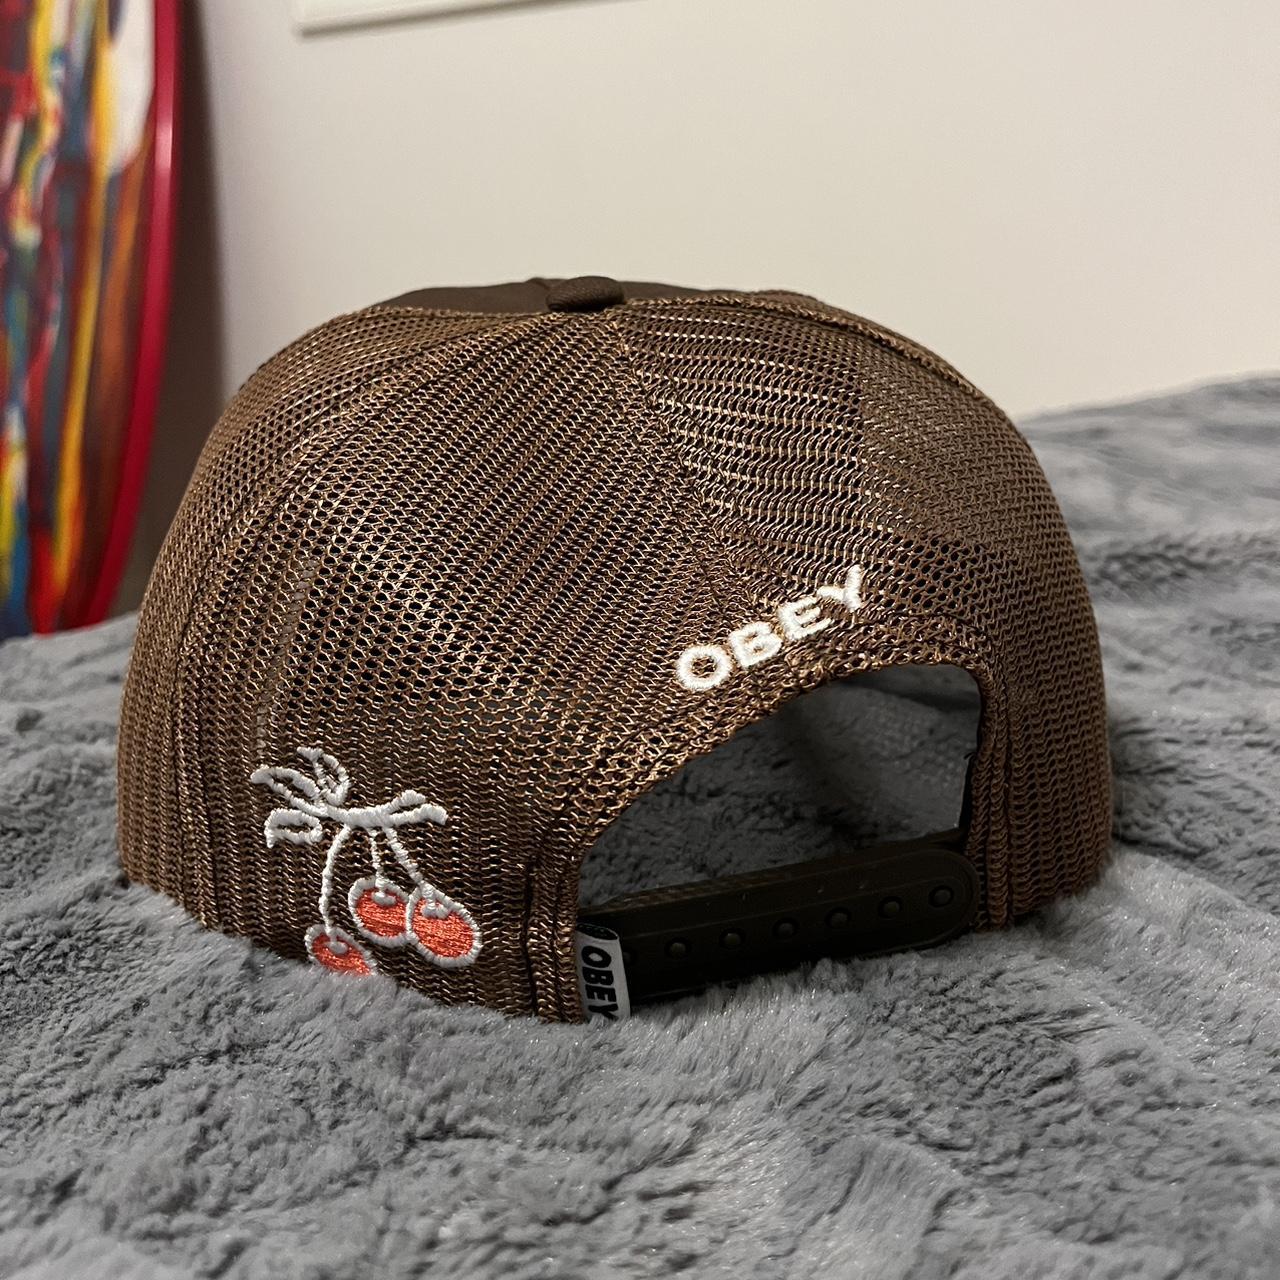 Obey Men's Brown and Red Hat (2)